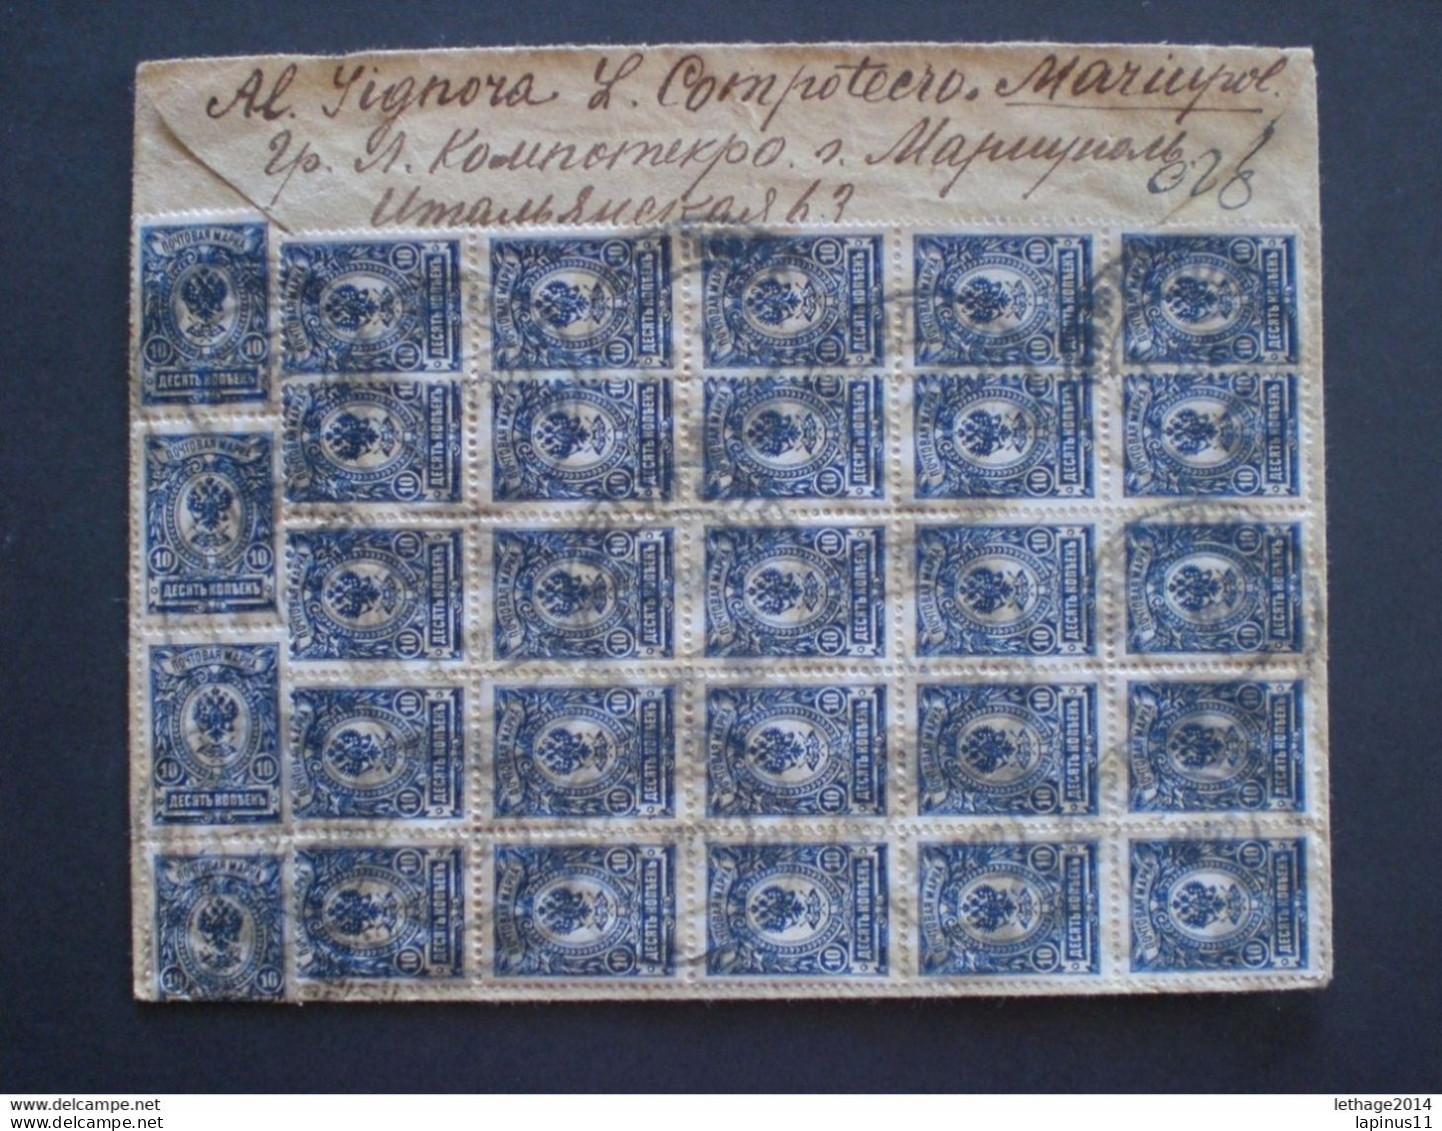 RUSSIA RUSSIE РОССИЯ STAMPS COVER 1923 Registered Mail RUSSIE TO ITALY MANY STAMPS FULL 30 STAMPS !! RRRRR RIF.TAGG.(2) - Brieven En Documenten